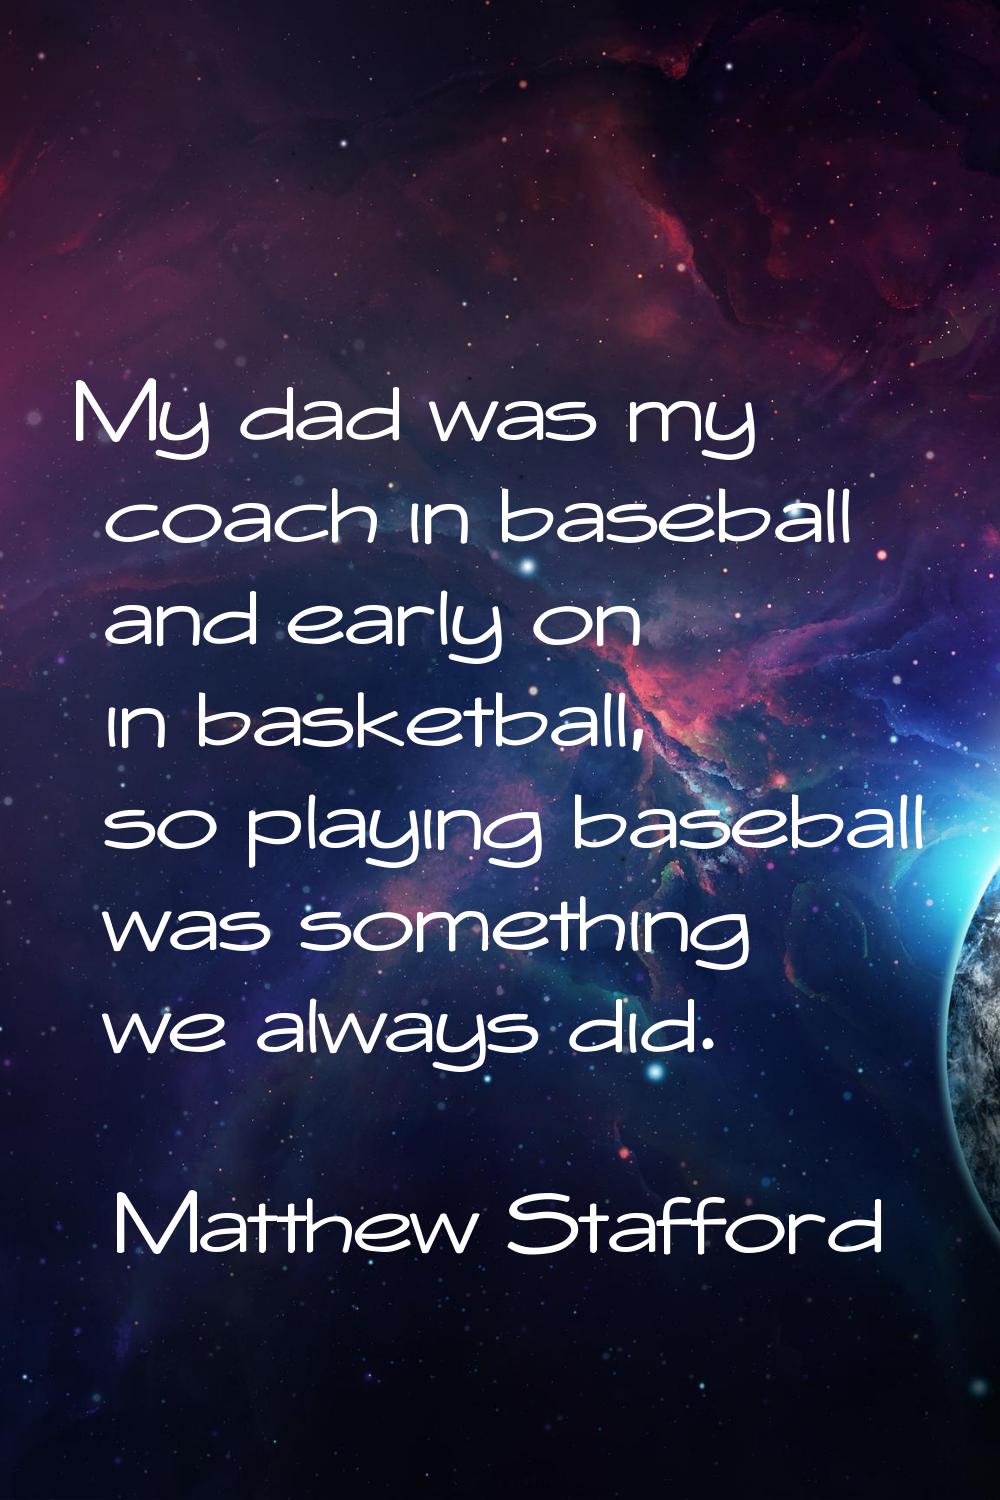 My dad was my coach in baseball and early on in basketball, so playing baseball was something we al